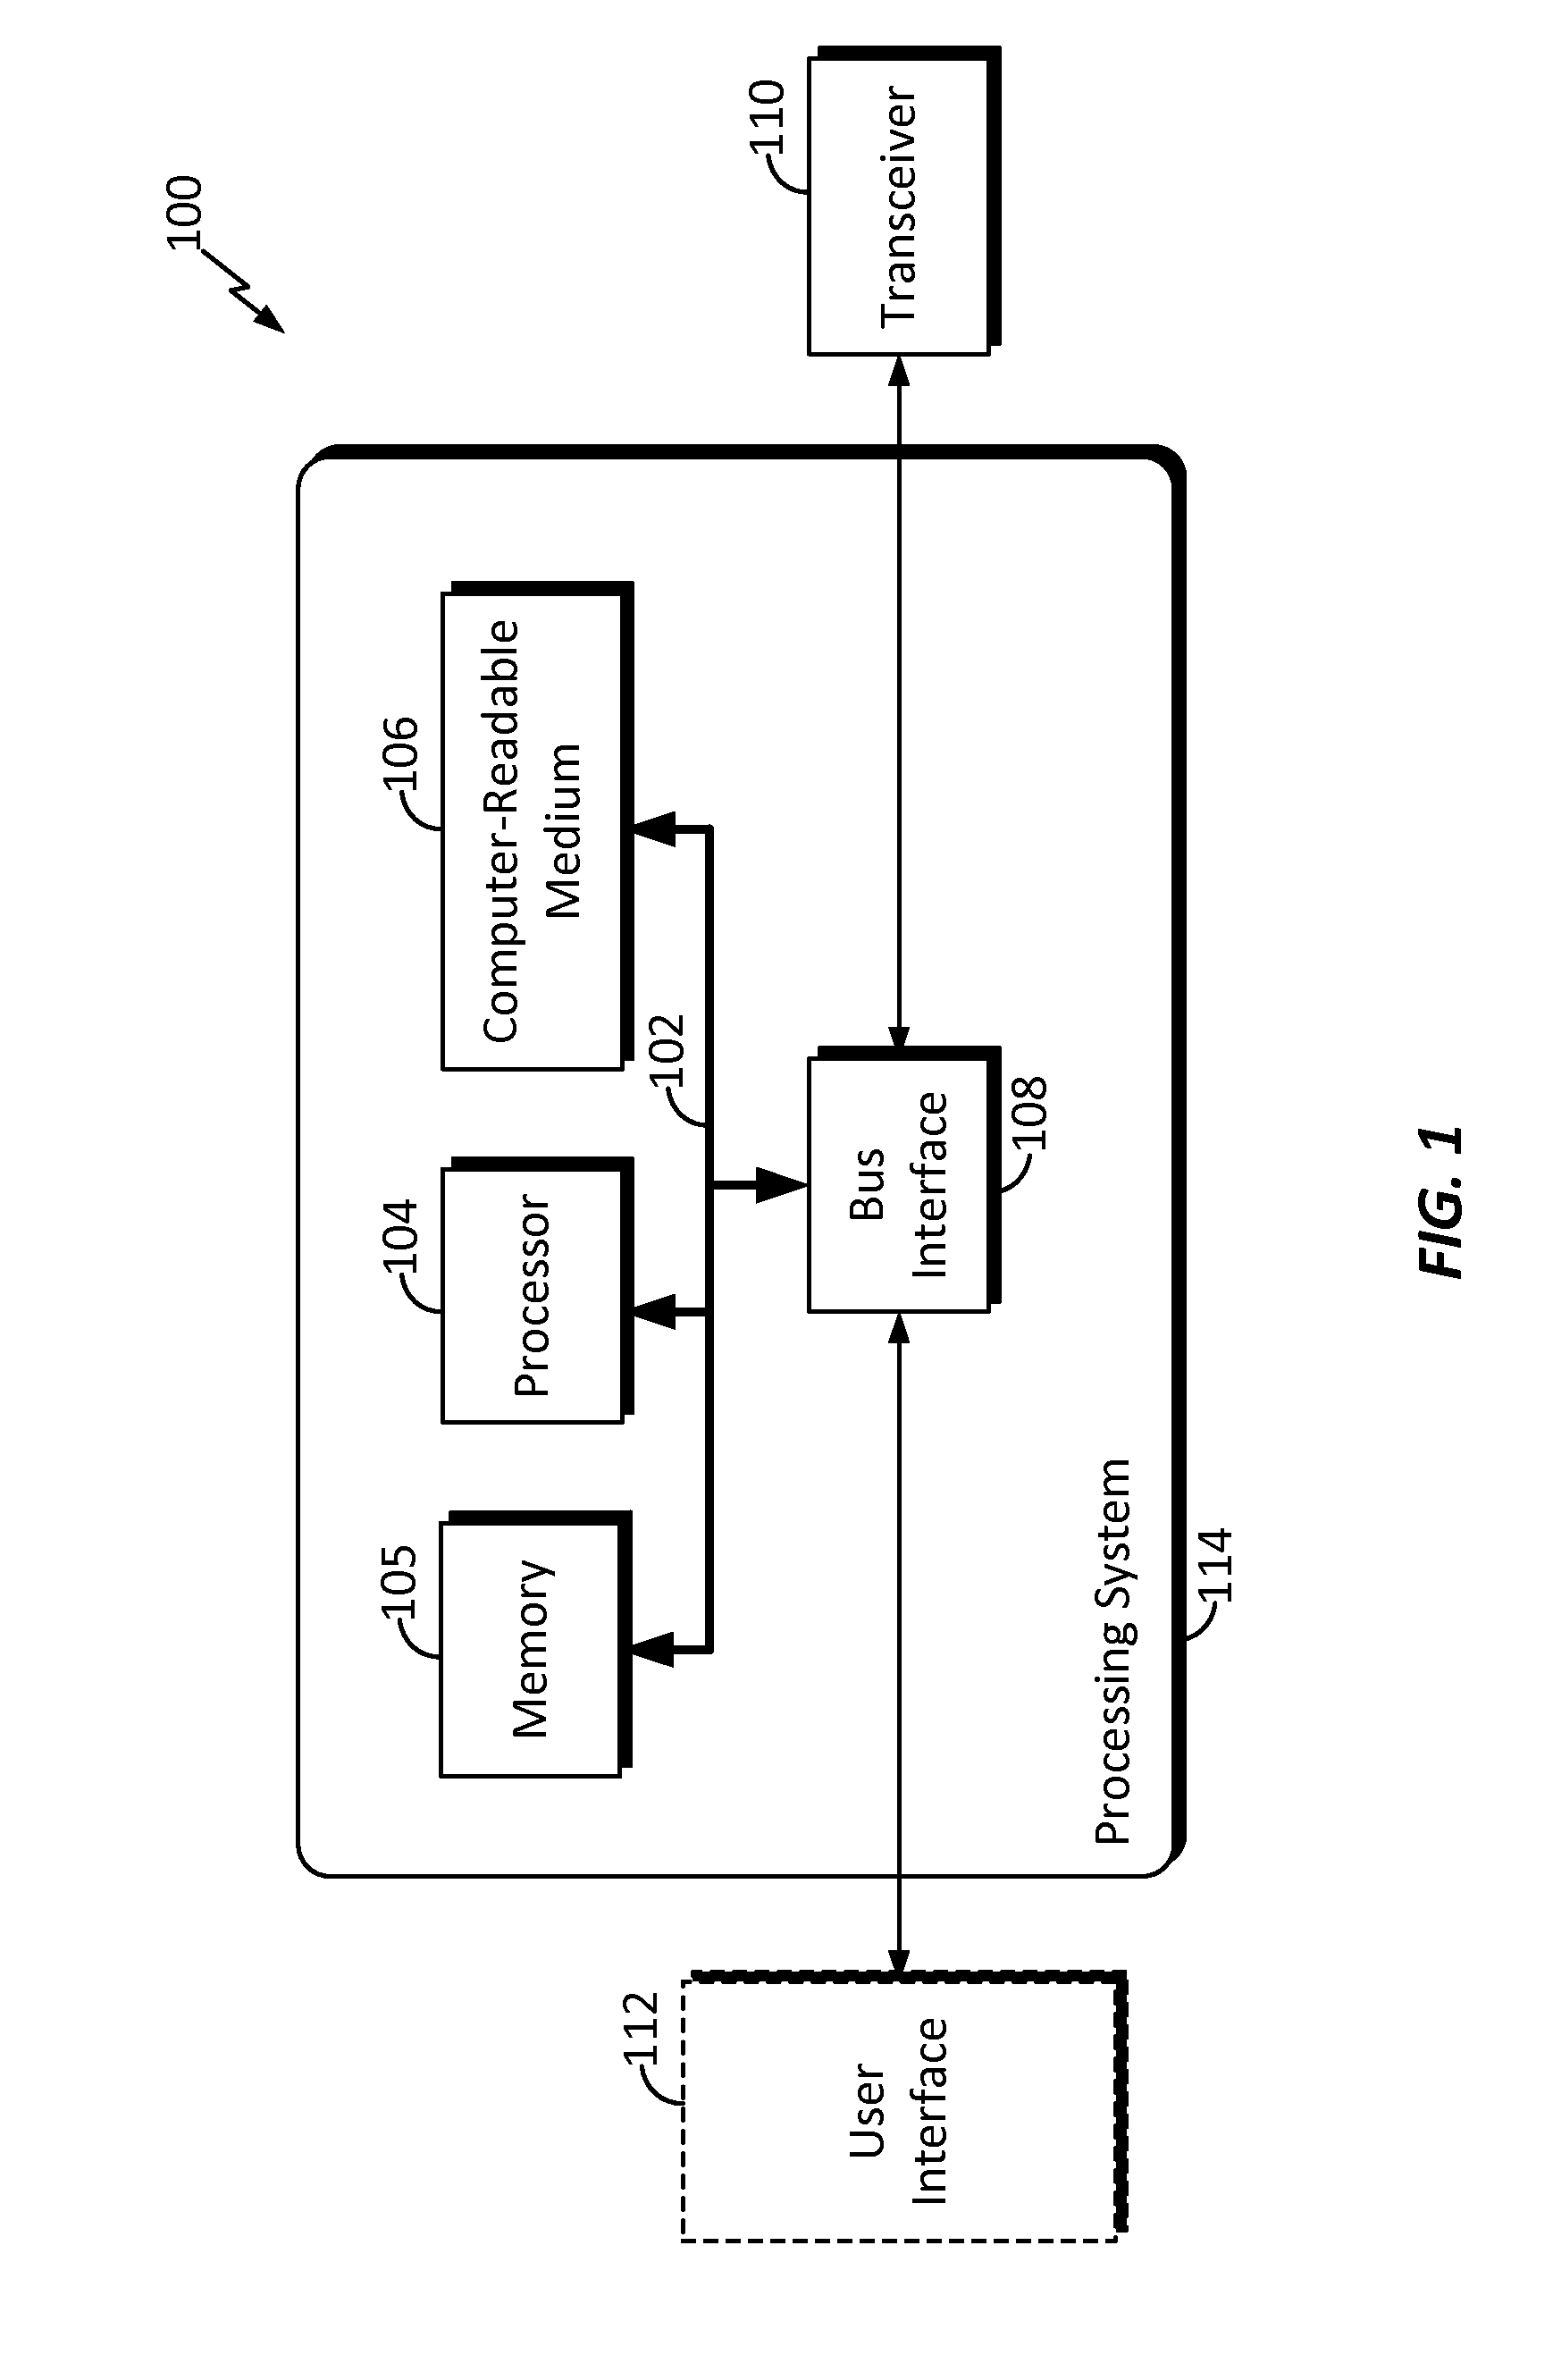 Apparatus and method for employing a page cycle learning mode